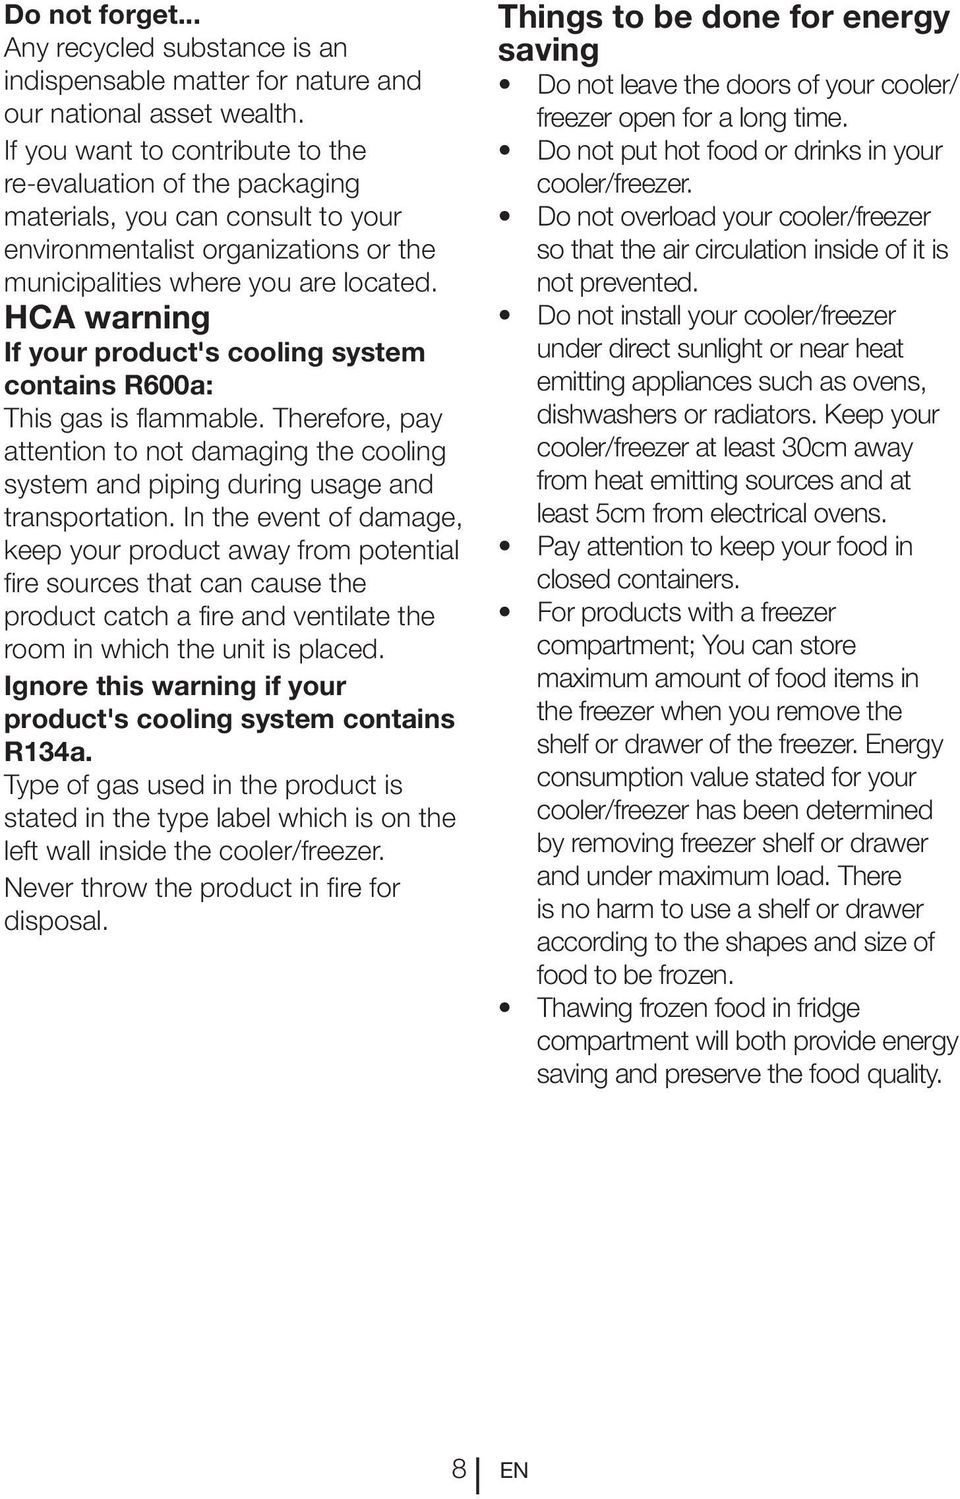 HCA warning If your product's cooling system contains R600a: This gas is flammable. Therefore, pay attention to not damaging the cooling system and piping during usage and transportation.